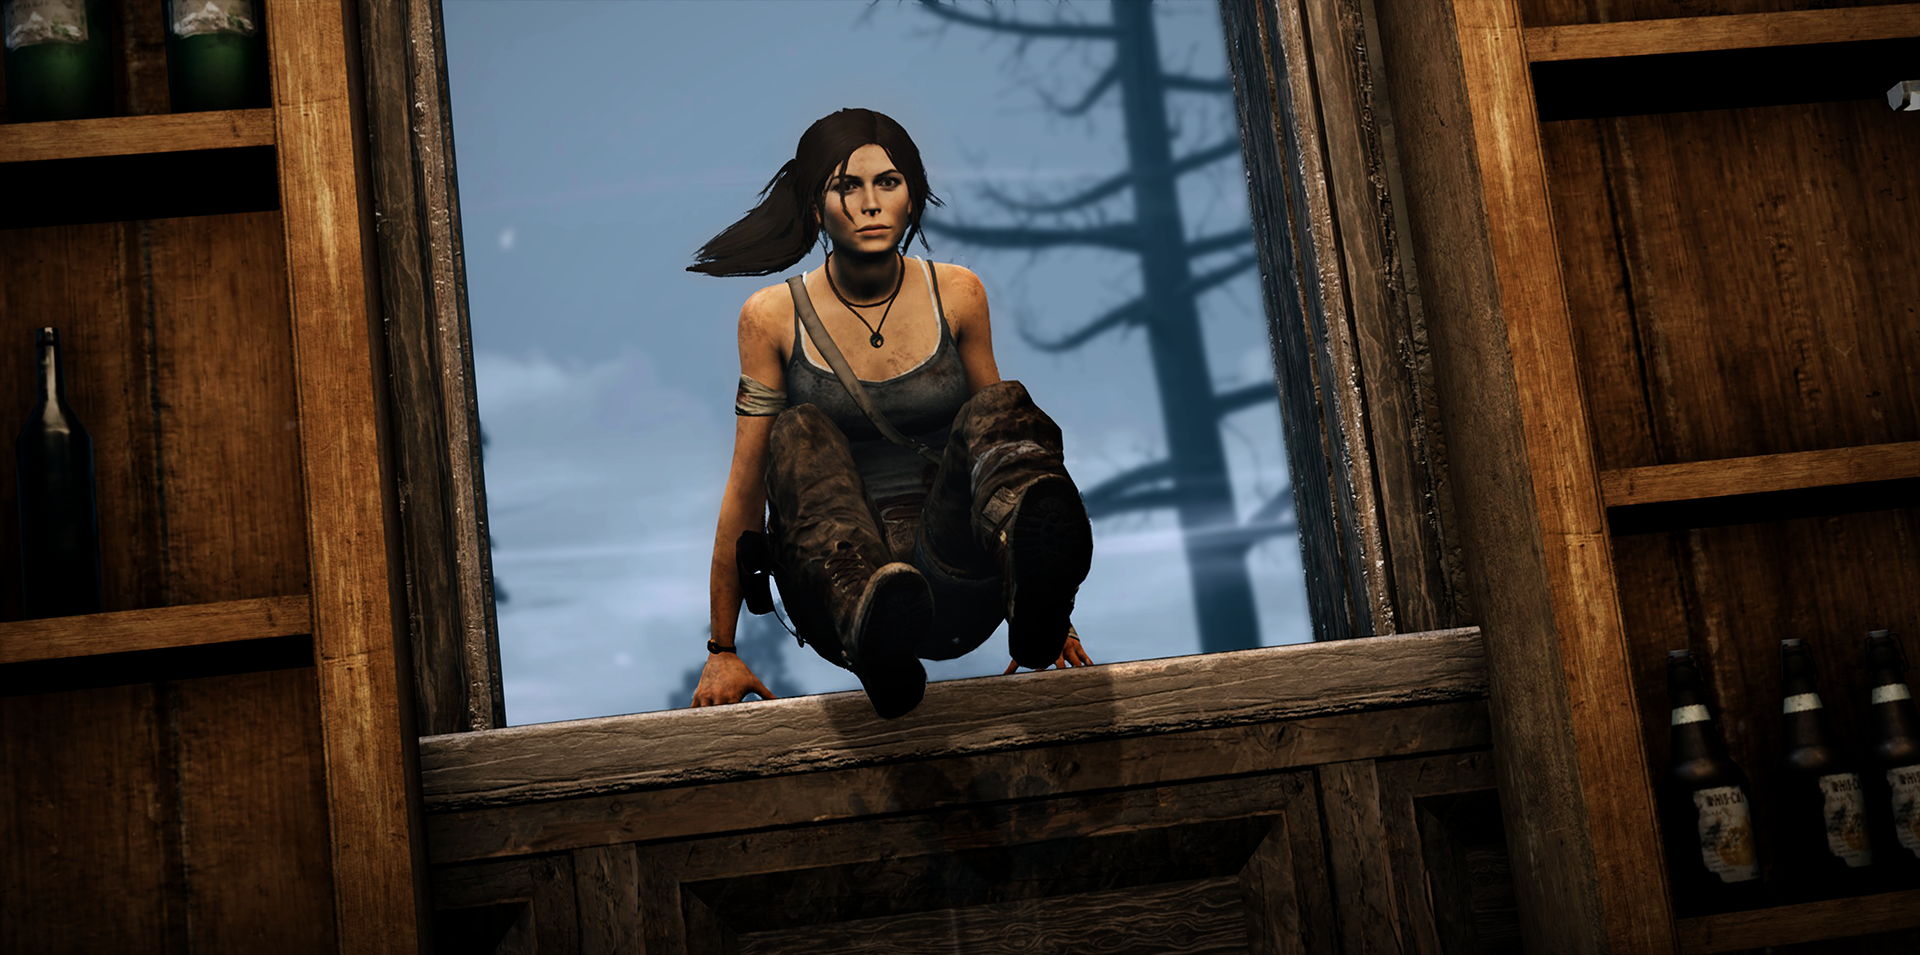 Lara Croft demonstrating her fast vault capability in Dead by Daylight by leaping through a windowsill.